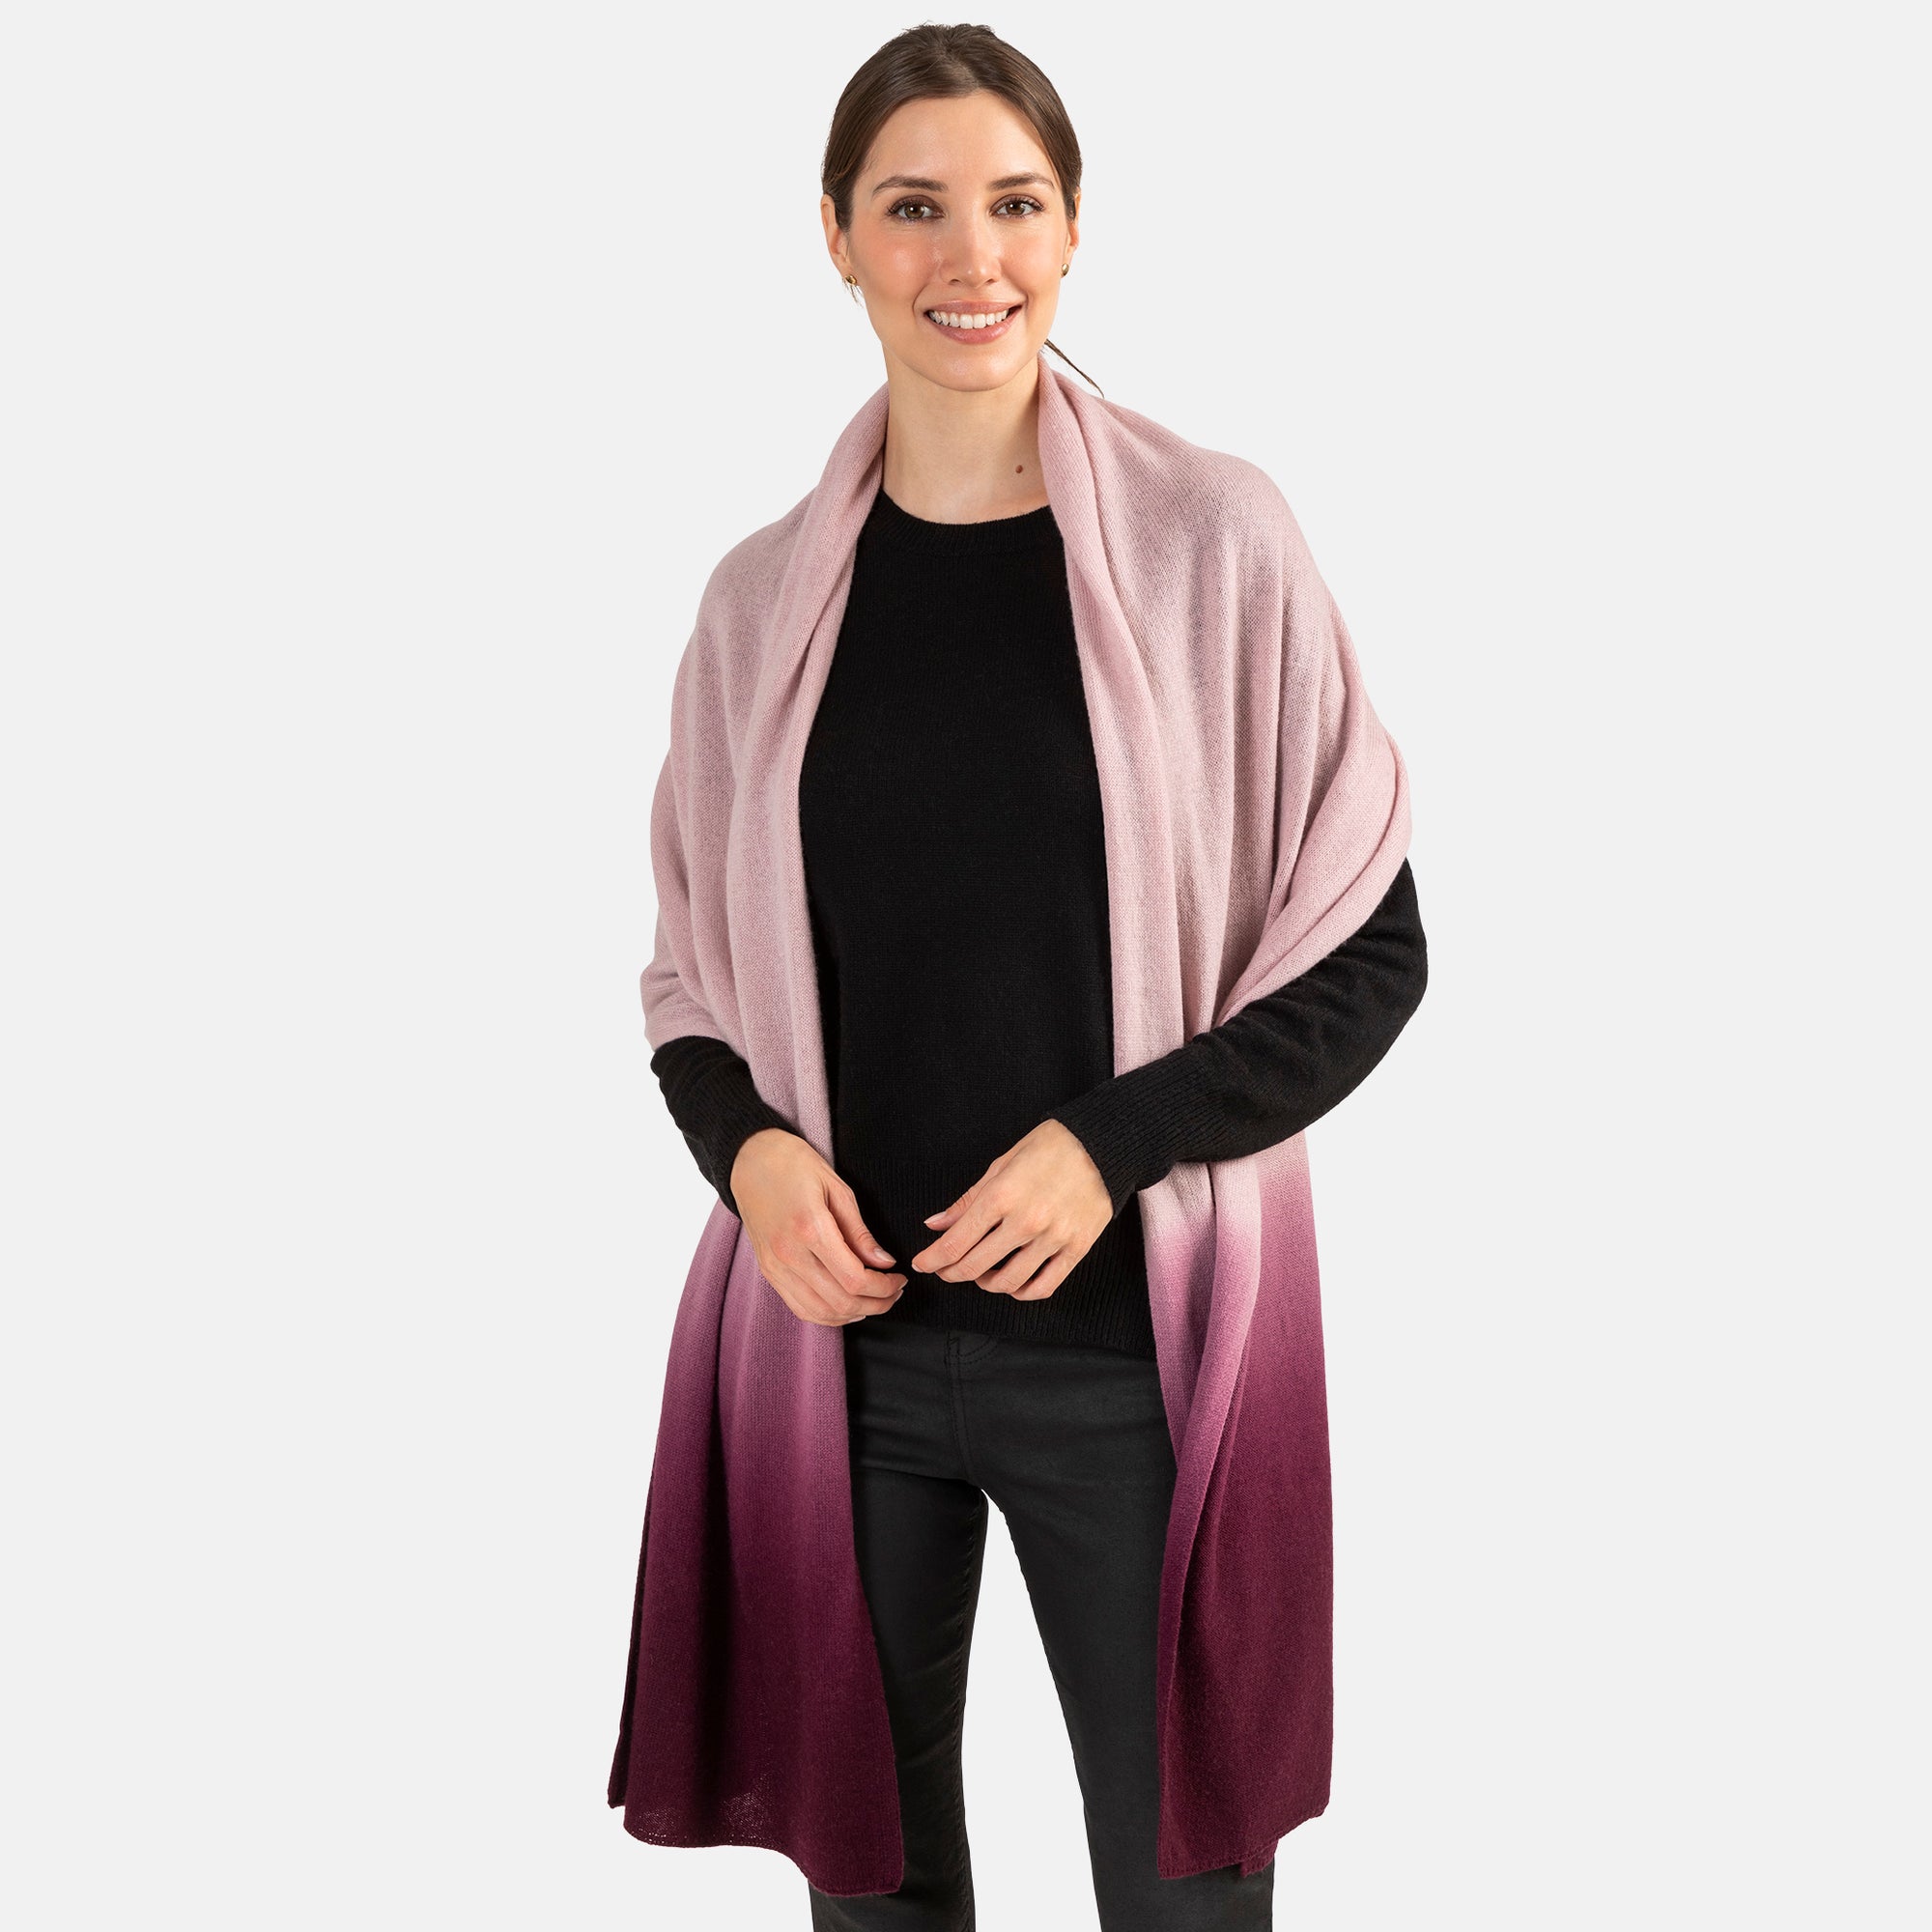 Picture of a woman wearing an oversized knitted cashmere travel wrap or scarf with an ombre pattern in pink and burgundy.  